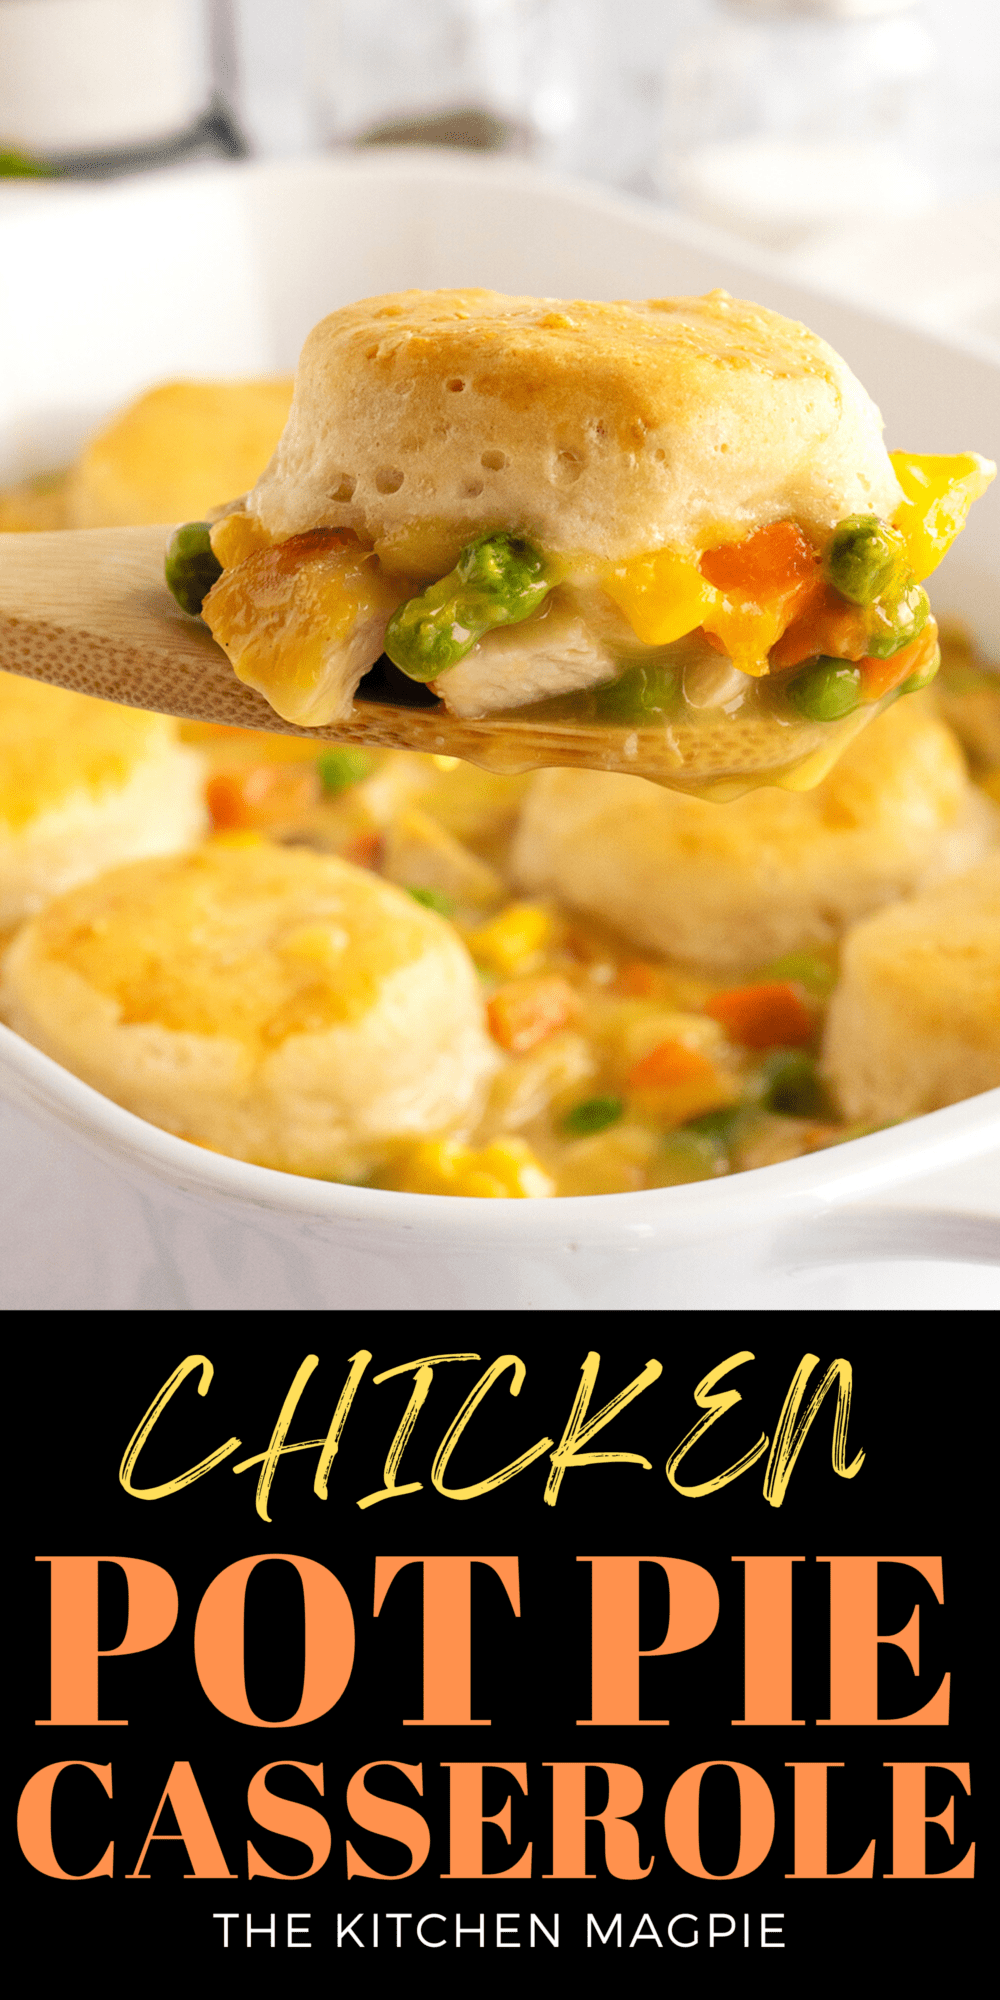 This chicken pot pie casserole is filling and tasty with chicken and a rich, nourishing broth, and being far easier to make all at once in one big casserole dish.